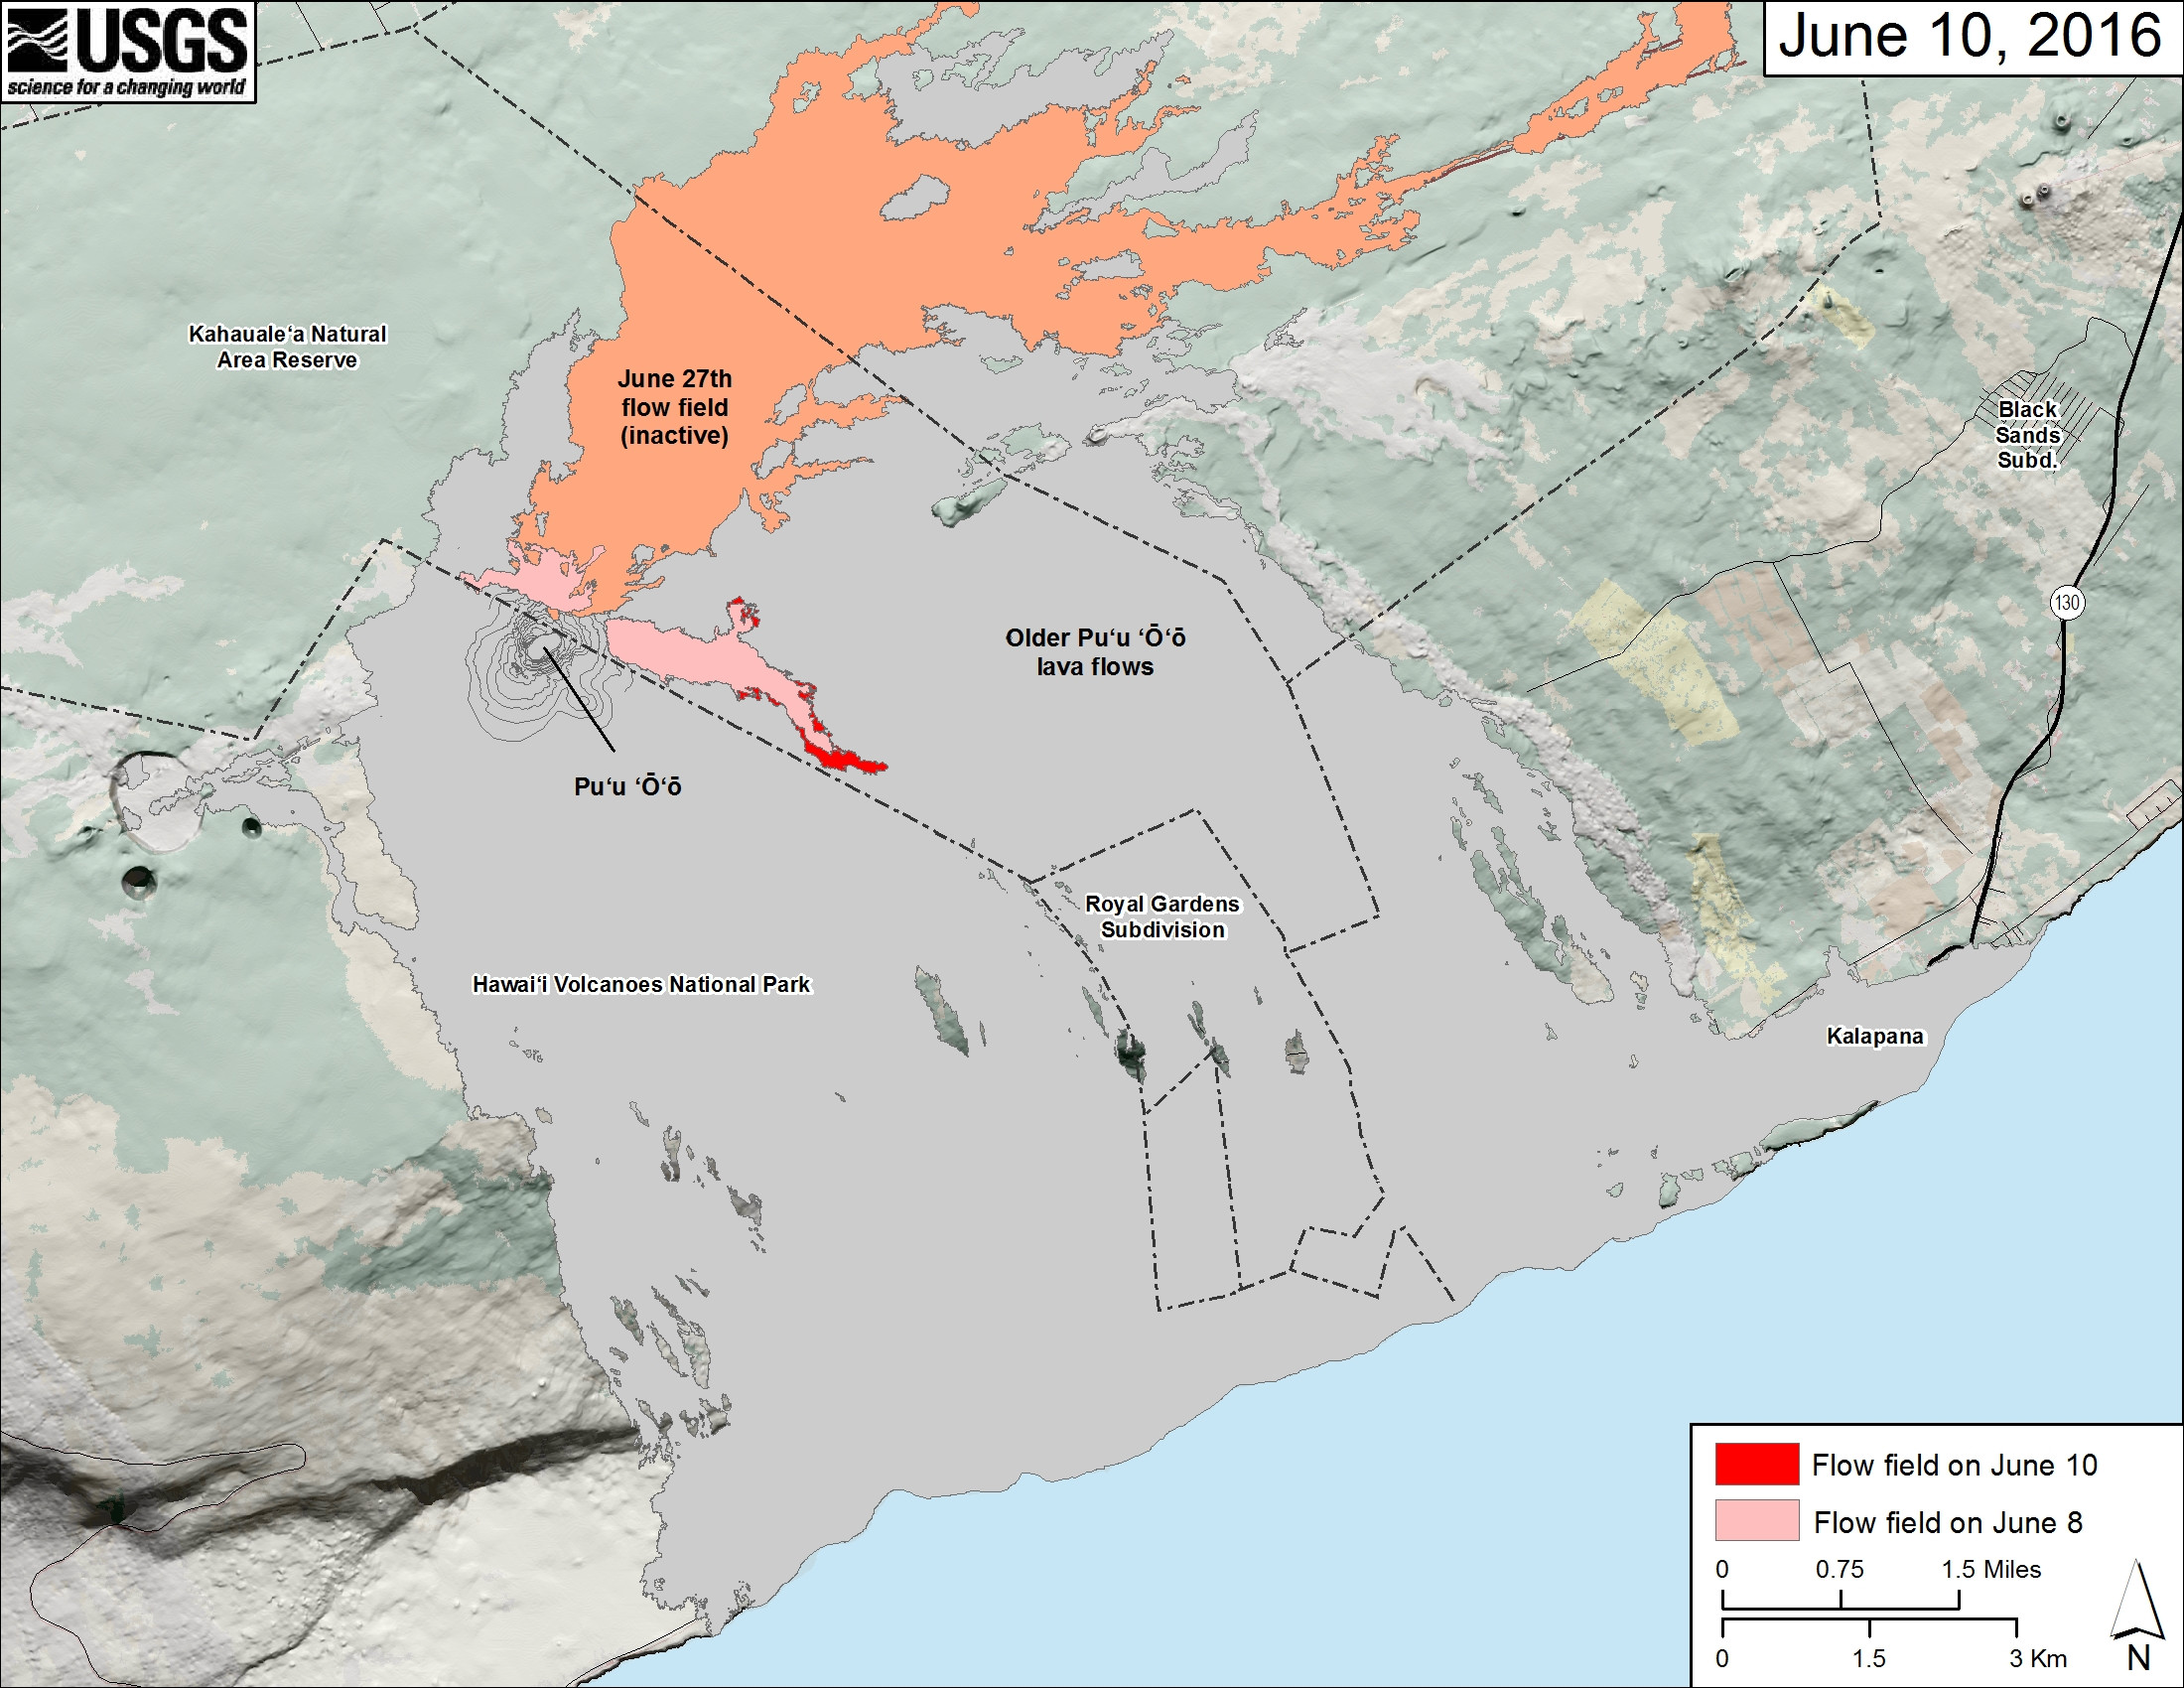 (USGS map) The area of the active flow field on June 8 is shown in pink, while widening and advancement of the flow field as mapped on June 10 is shown in red. The area covered by the June 27th flow (now inactive) as of June 2 is shown in orange. The Puʻu ʻŌʻō lava flows erupted prior to June 27, 2014, are shown in gray. 